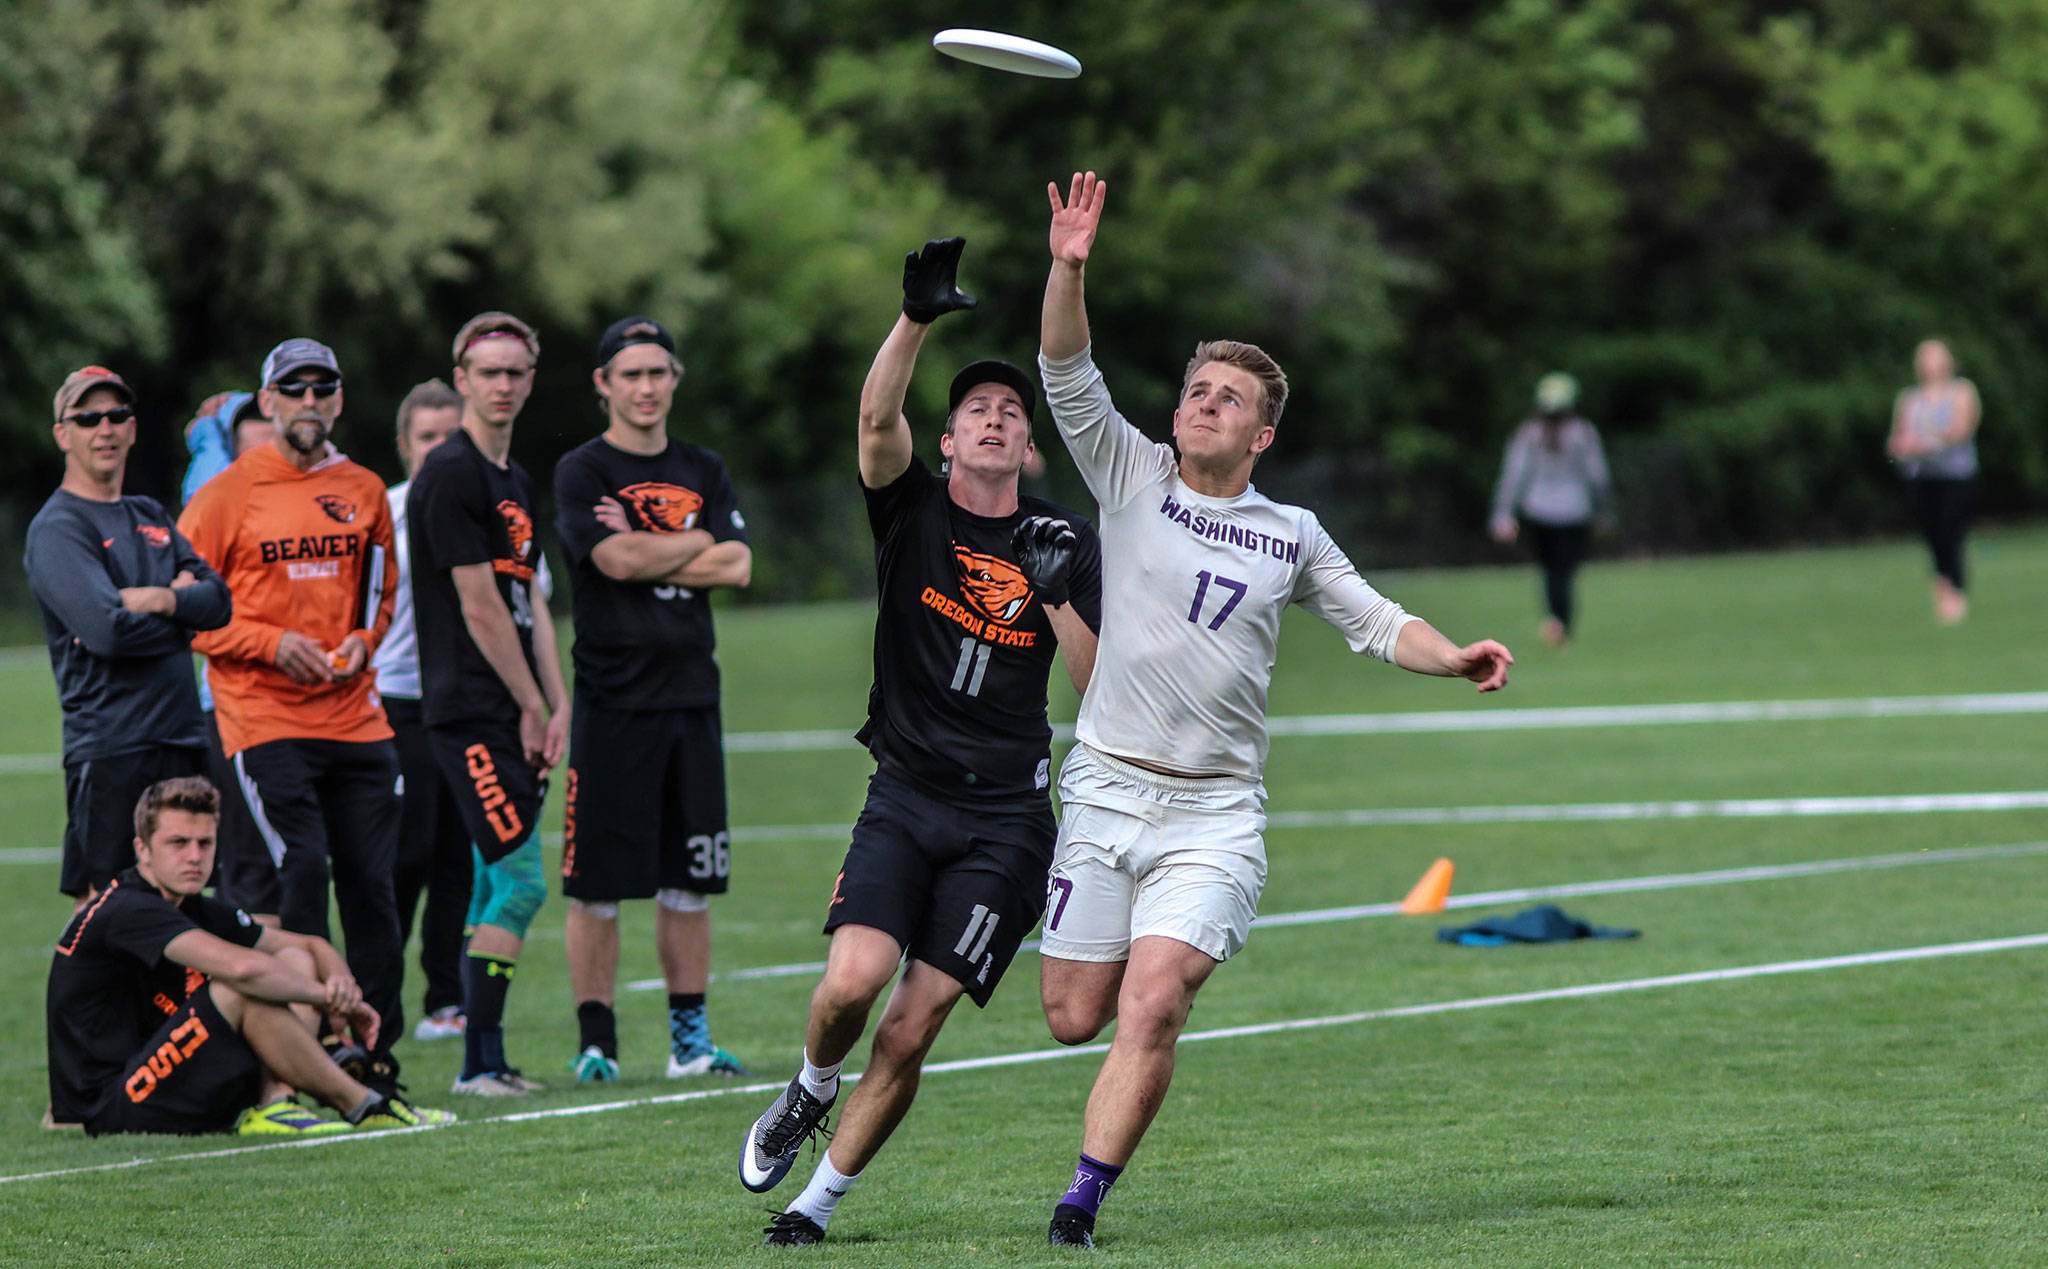 Will Simms (17), playing for the University of Washington, reaches to make a catch against Oregon State at the regional championships. (submitted photo)